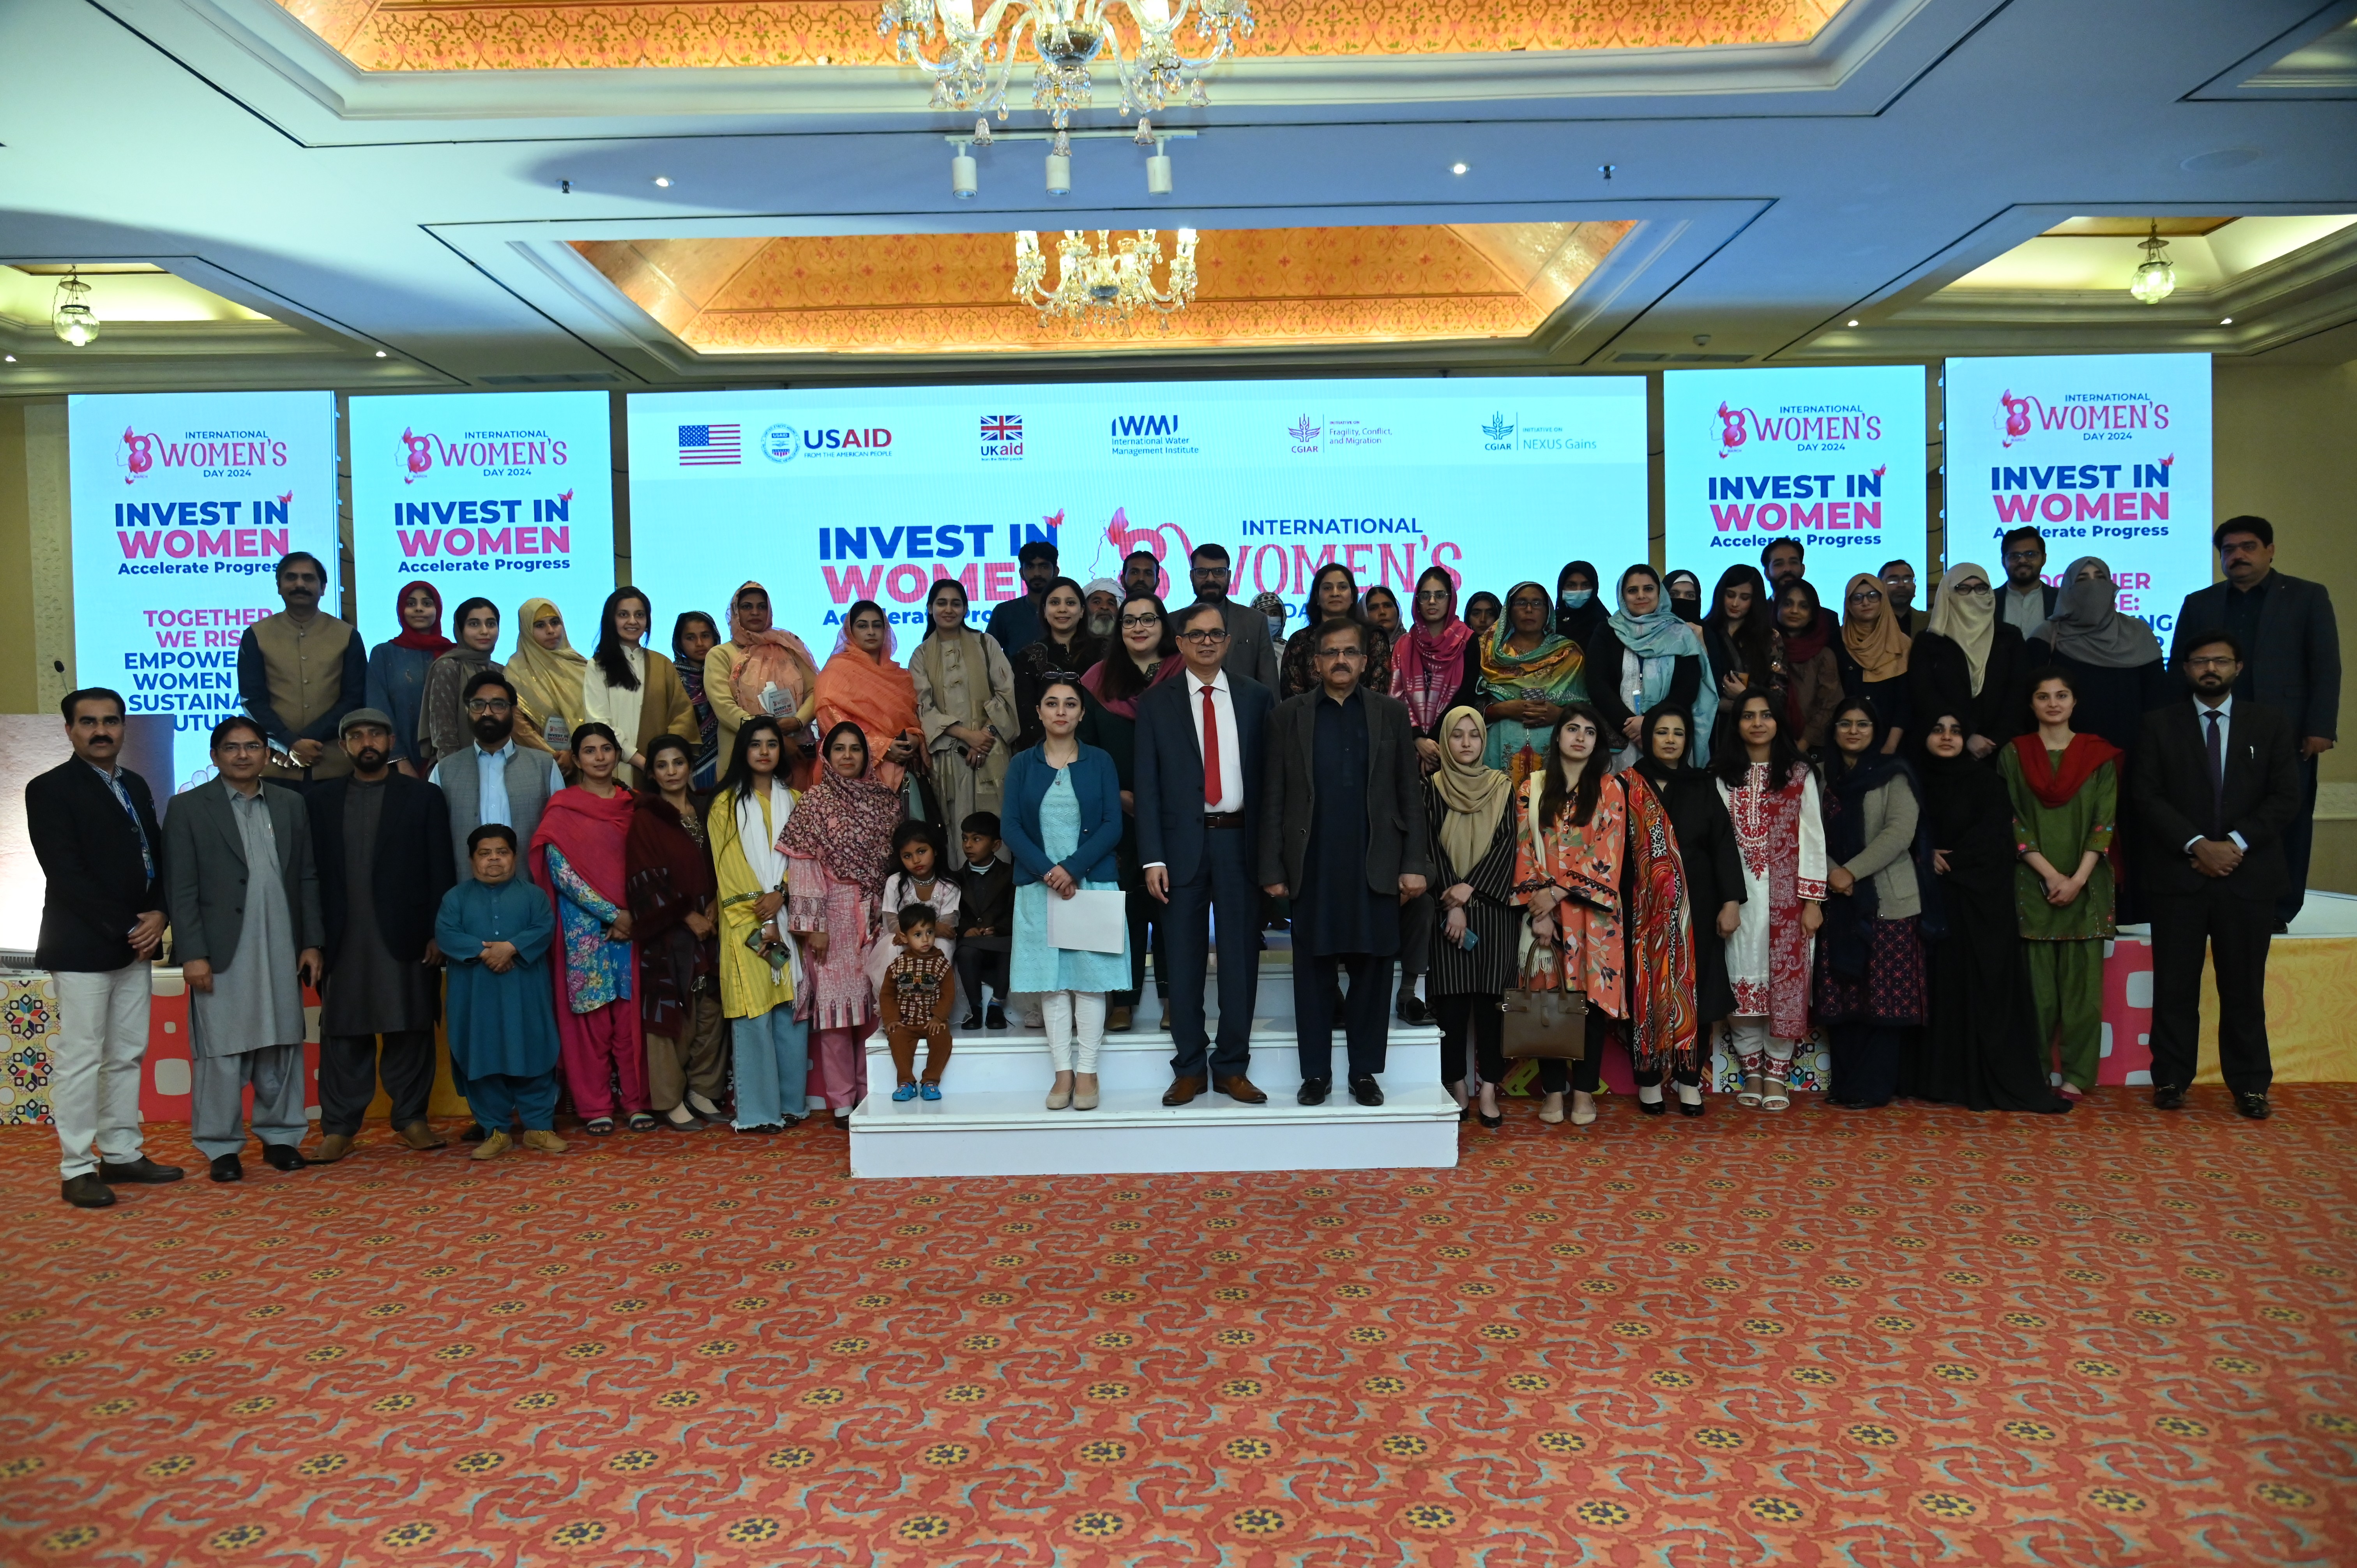 The group photo of the participants and the chief guests at the International Women's Day